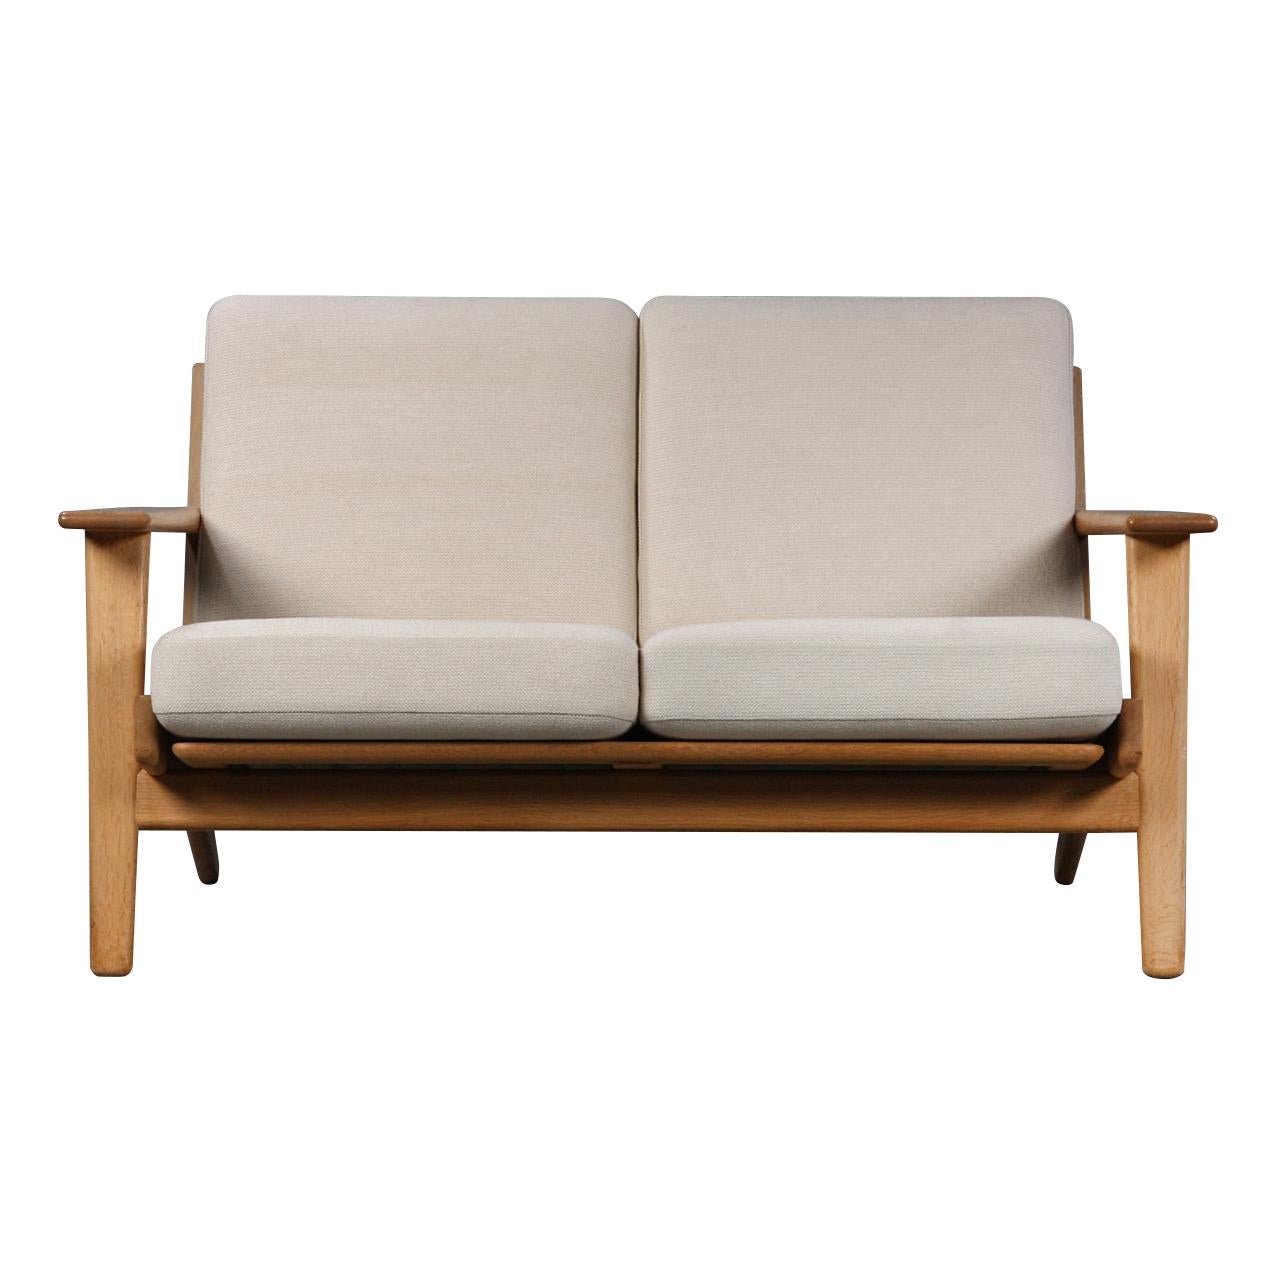 Gorgeous vintage two-seat sofa model GE-290/2 designed by Hans J. Wegner for GETAMA, Denmark. Wegner is widely considered to be one of the leading figures in 20th century furniture design. His furniture designs unite form and function, furnishing